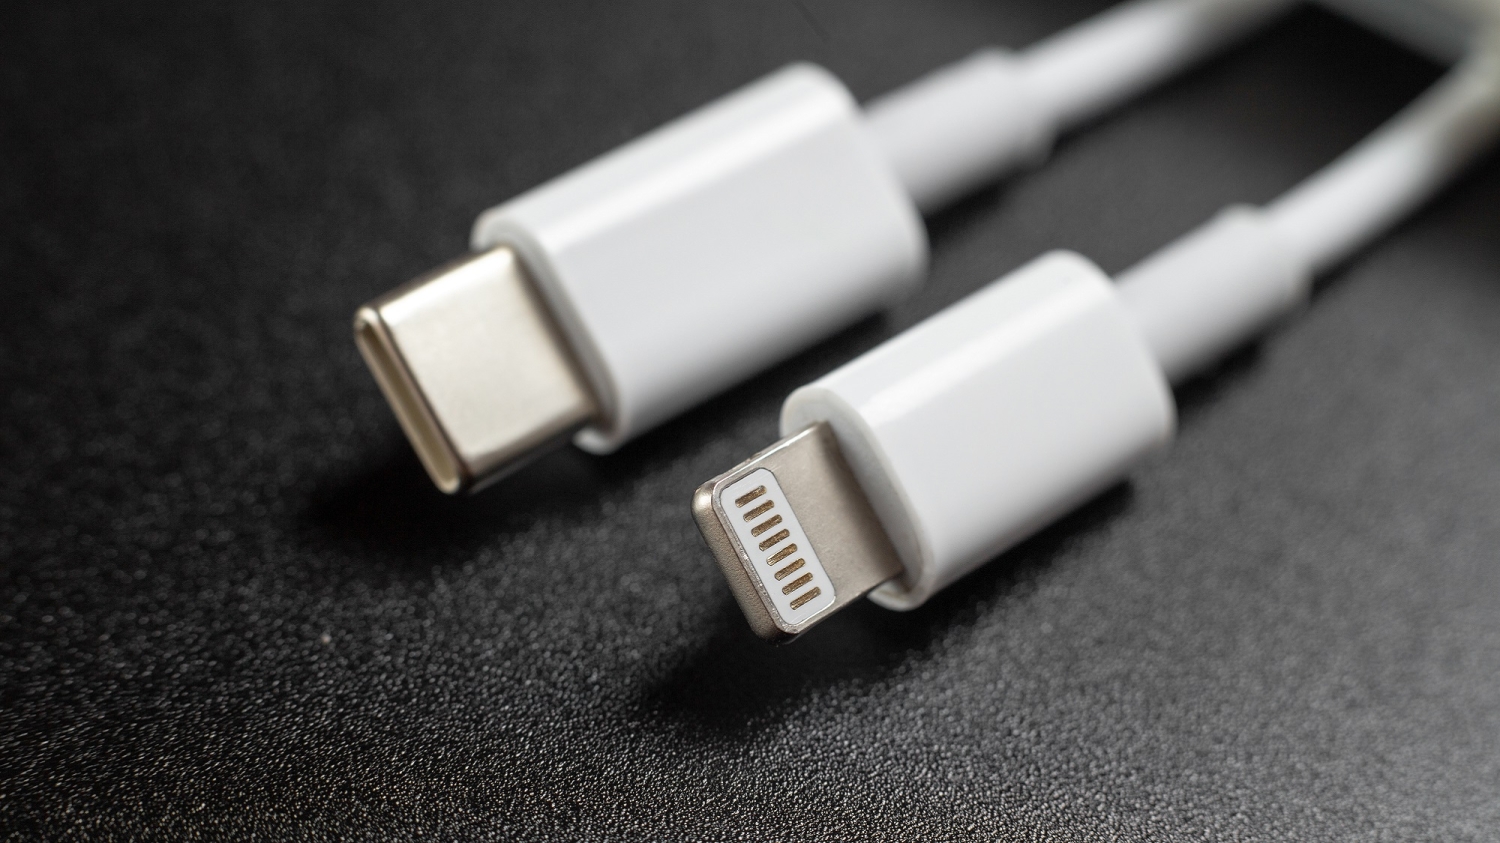 Apple is reportedly finally testing future iPhone's with USB-C ports